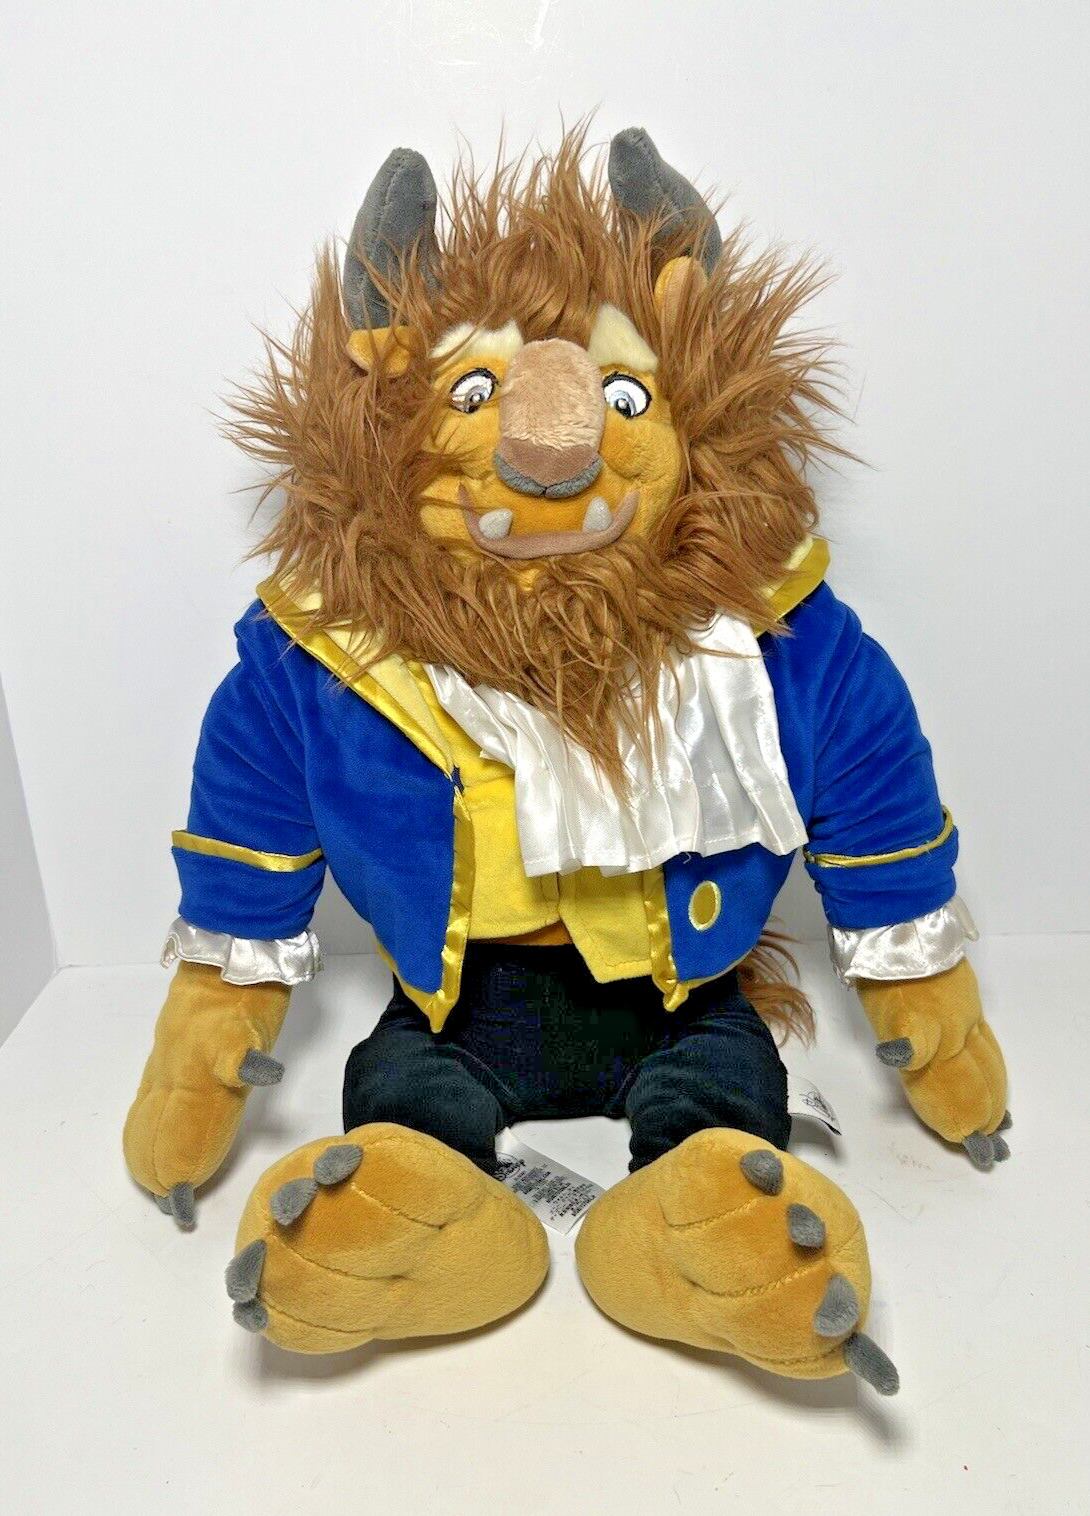 Official Disney Beauty & The Beast Plush - BEAST 20 Inches Tall - Excellent